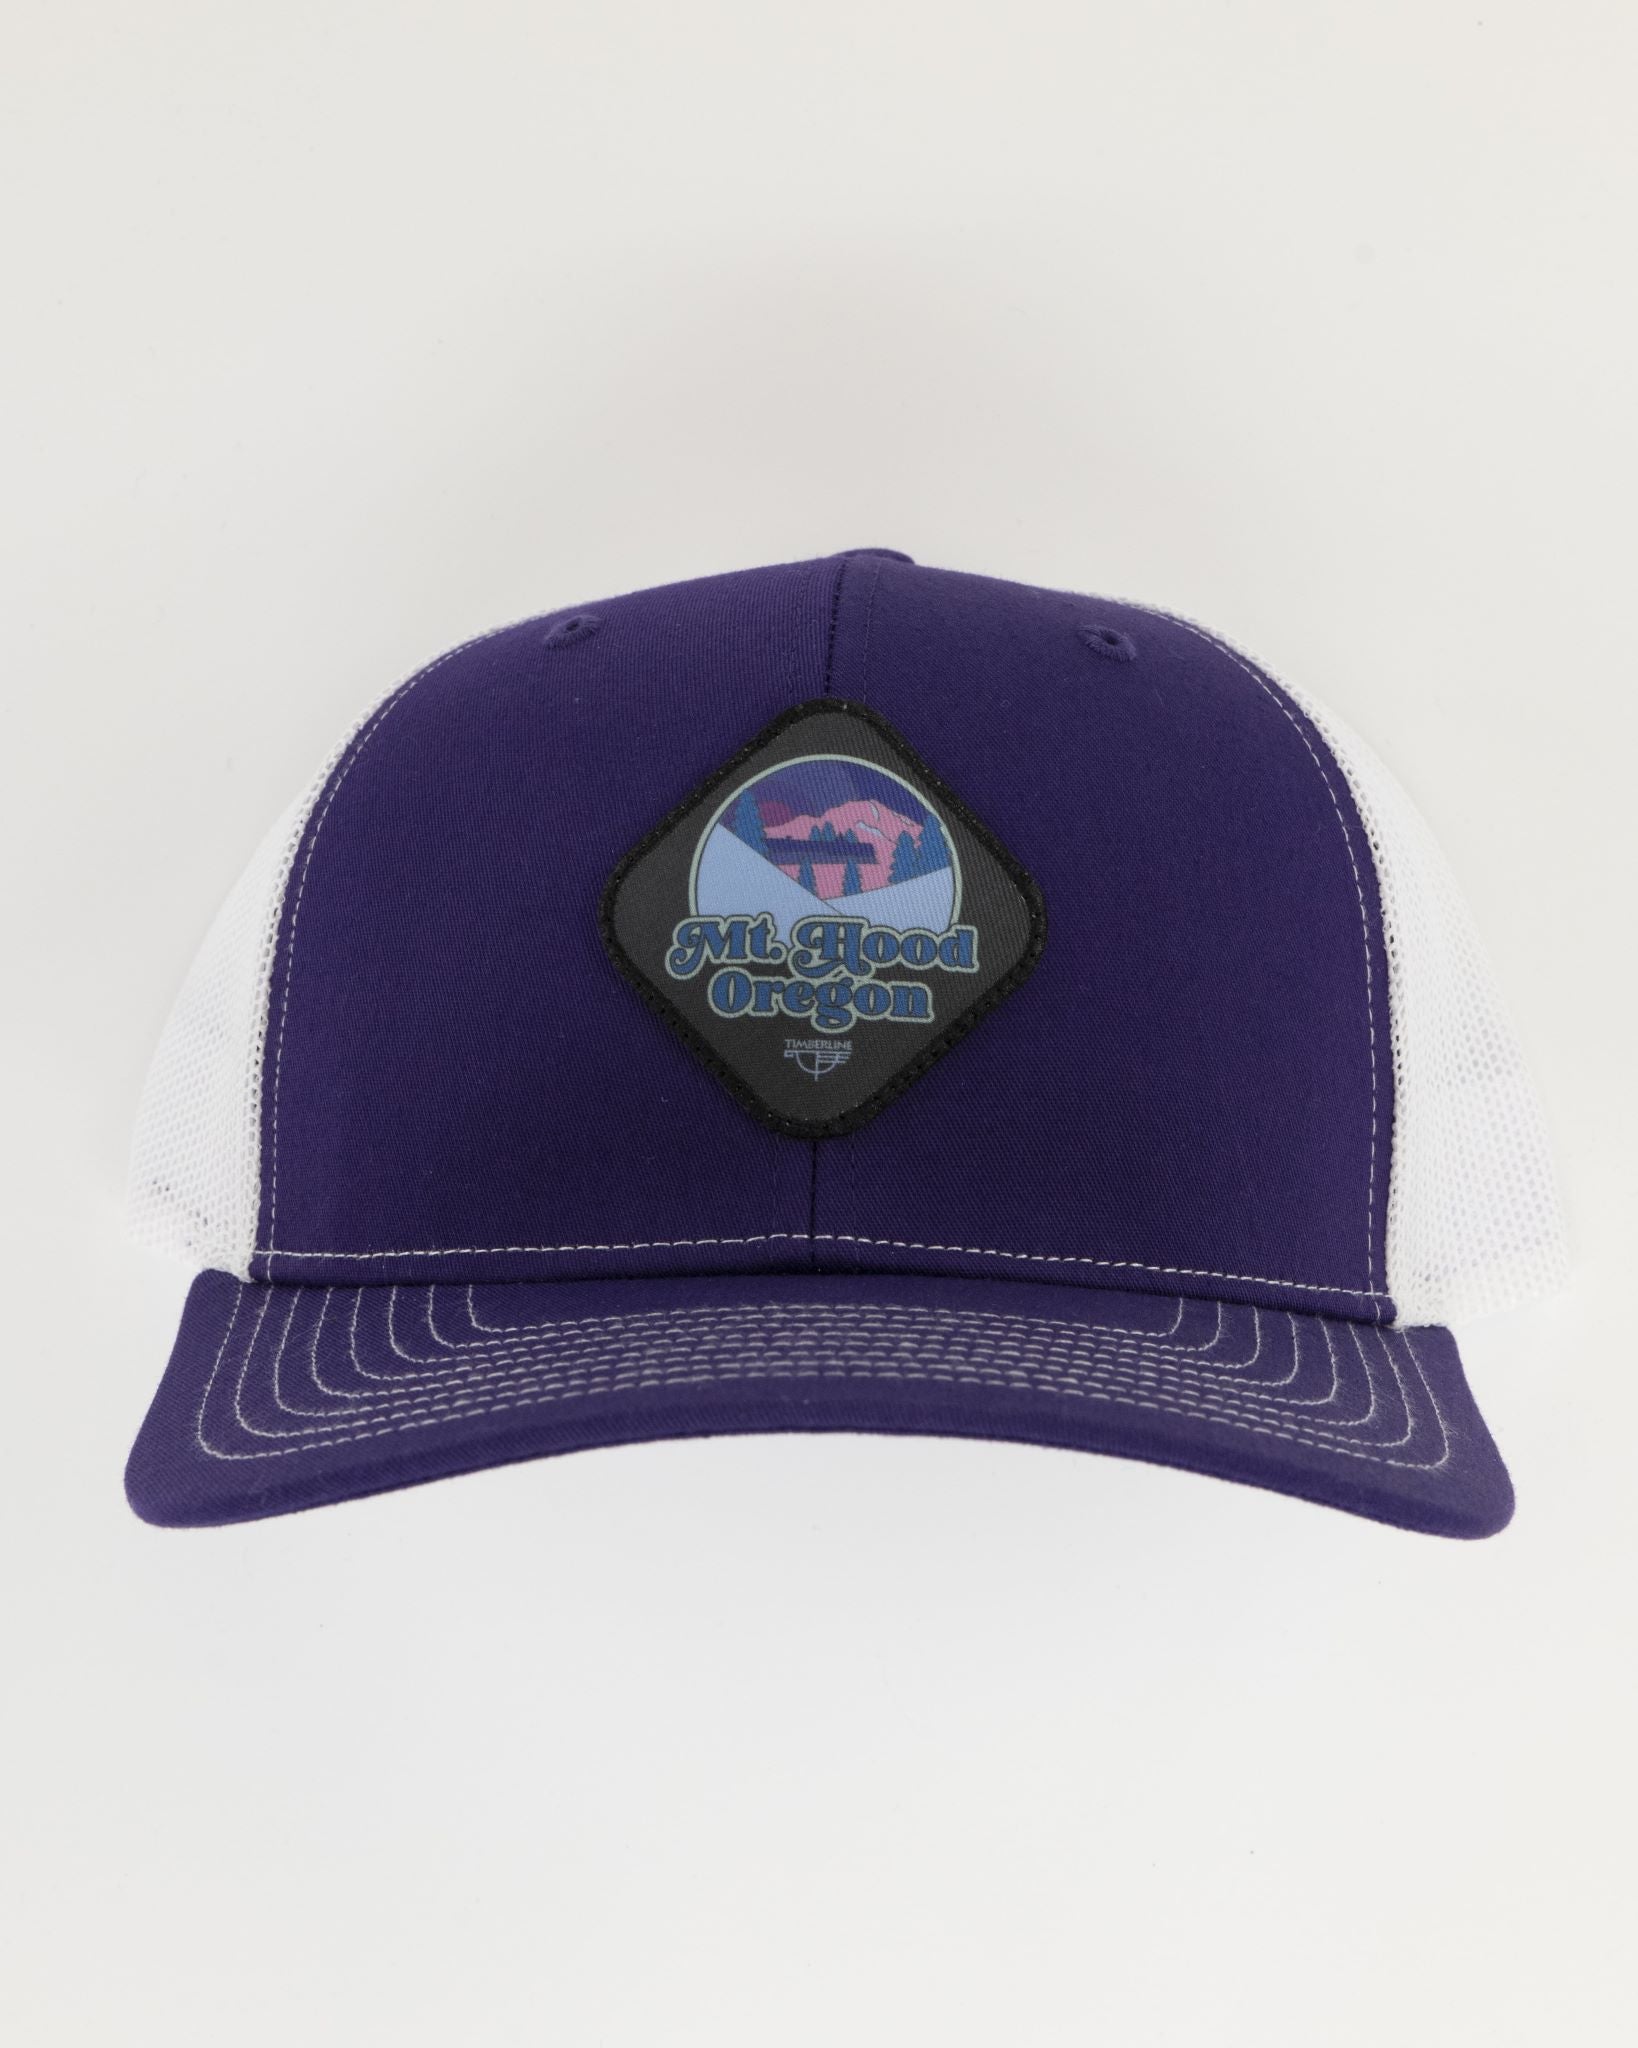 Hat - Iconic Blue - Online Navy Lodge - Store Timberline Cap